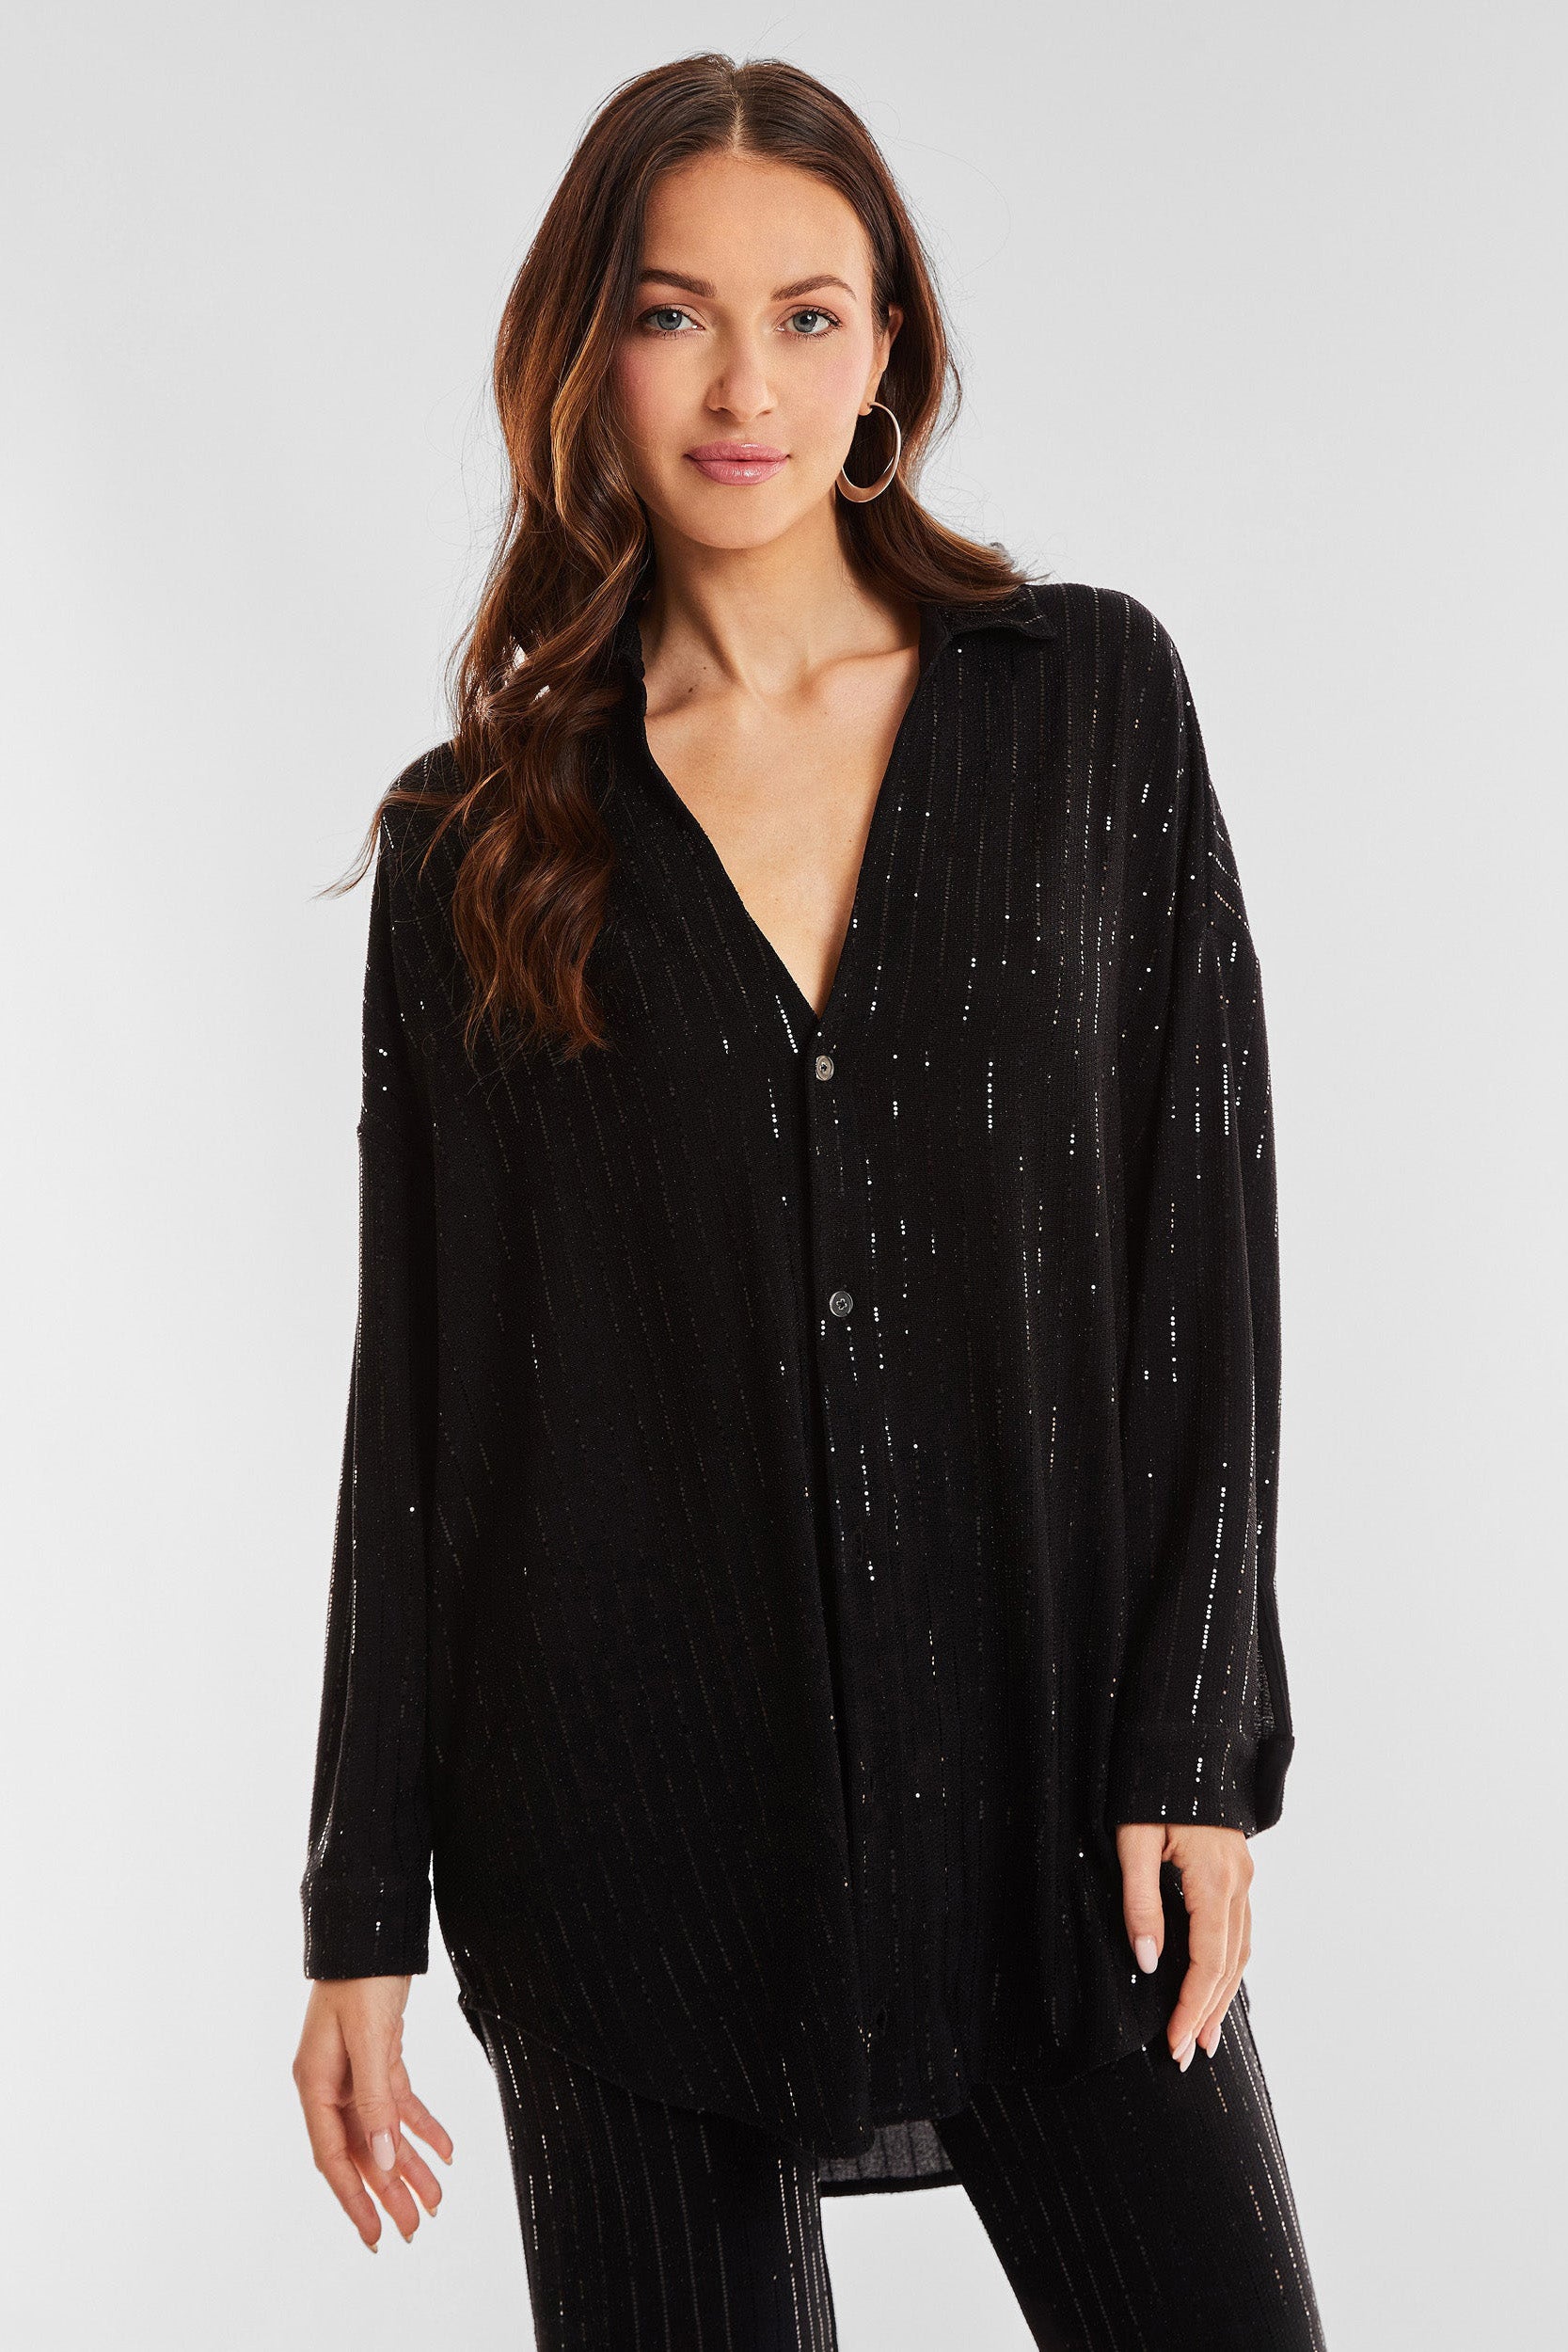 A person with long, wavy hair is wearing an Amalfi Embellished Shirt - Black, a long-sleeved button-up featuring subtle vertical shimmering stripes. They are posing against a plain light gray background, looking directly at the camera with a neutral expression.